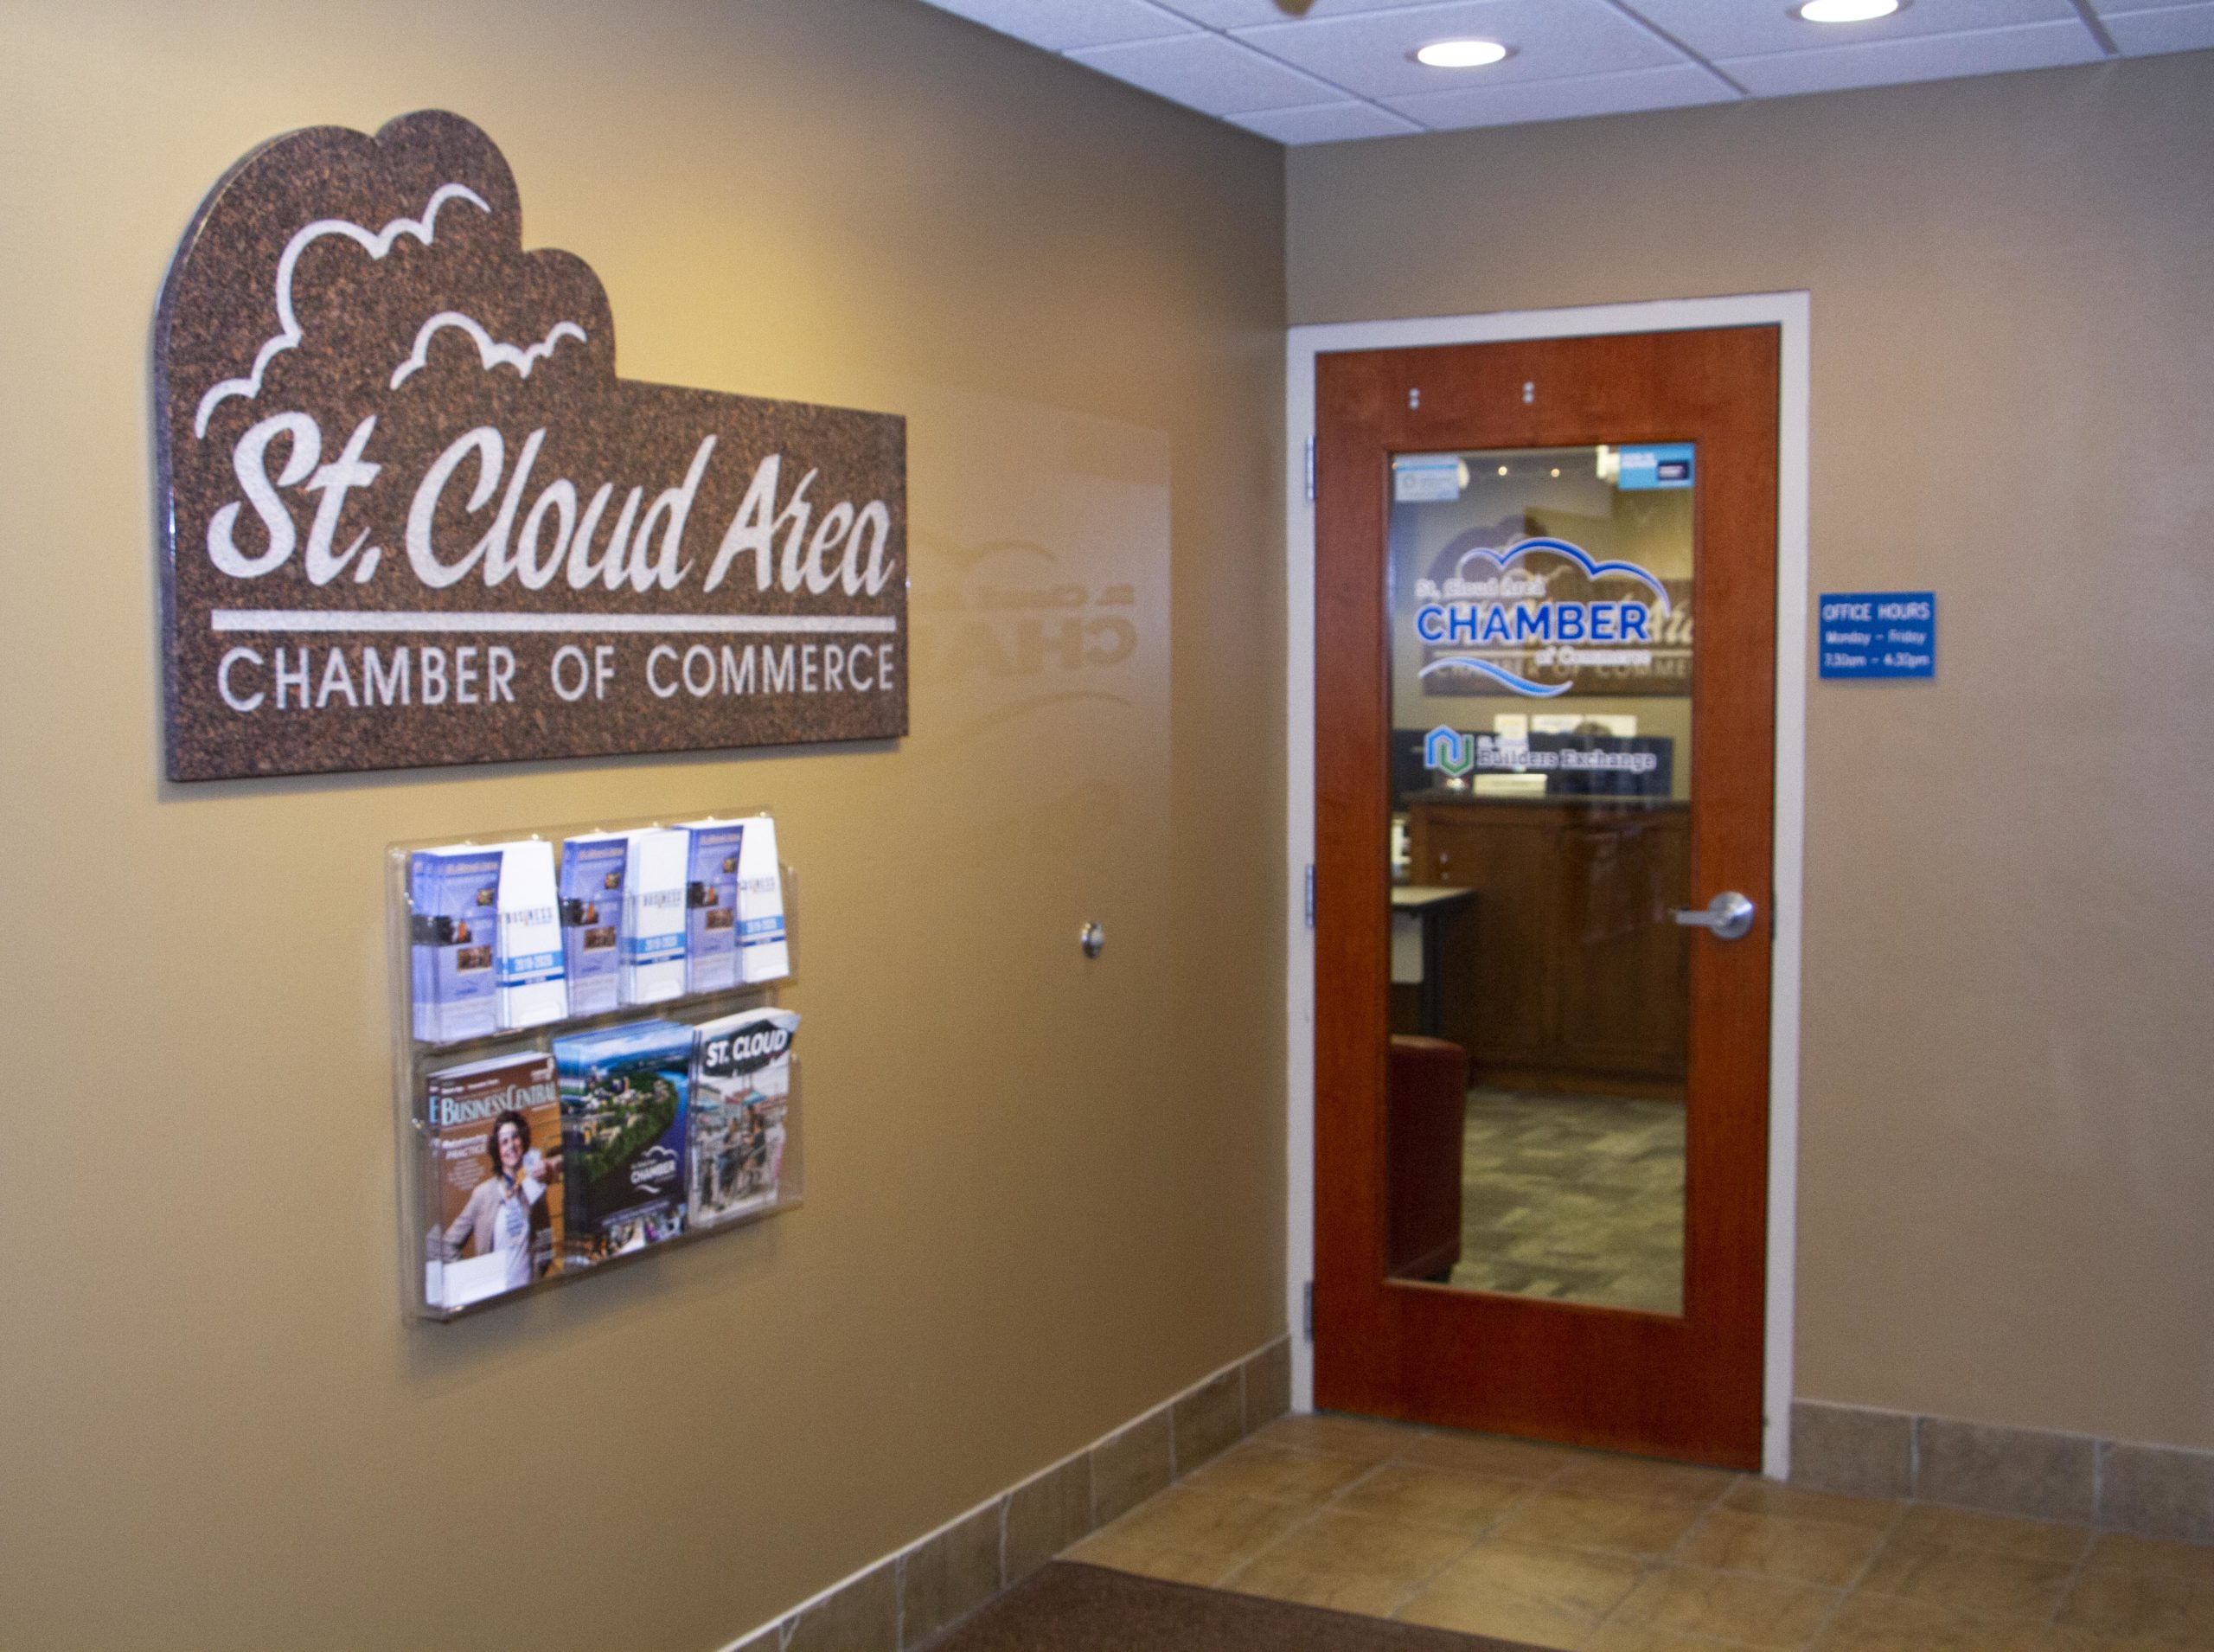 St. Cloud Area Chamber of Commerce